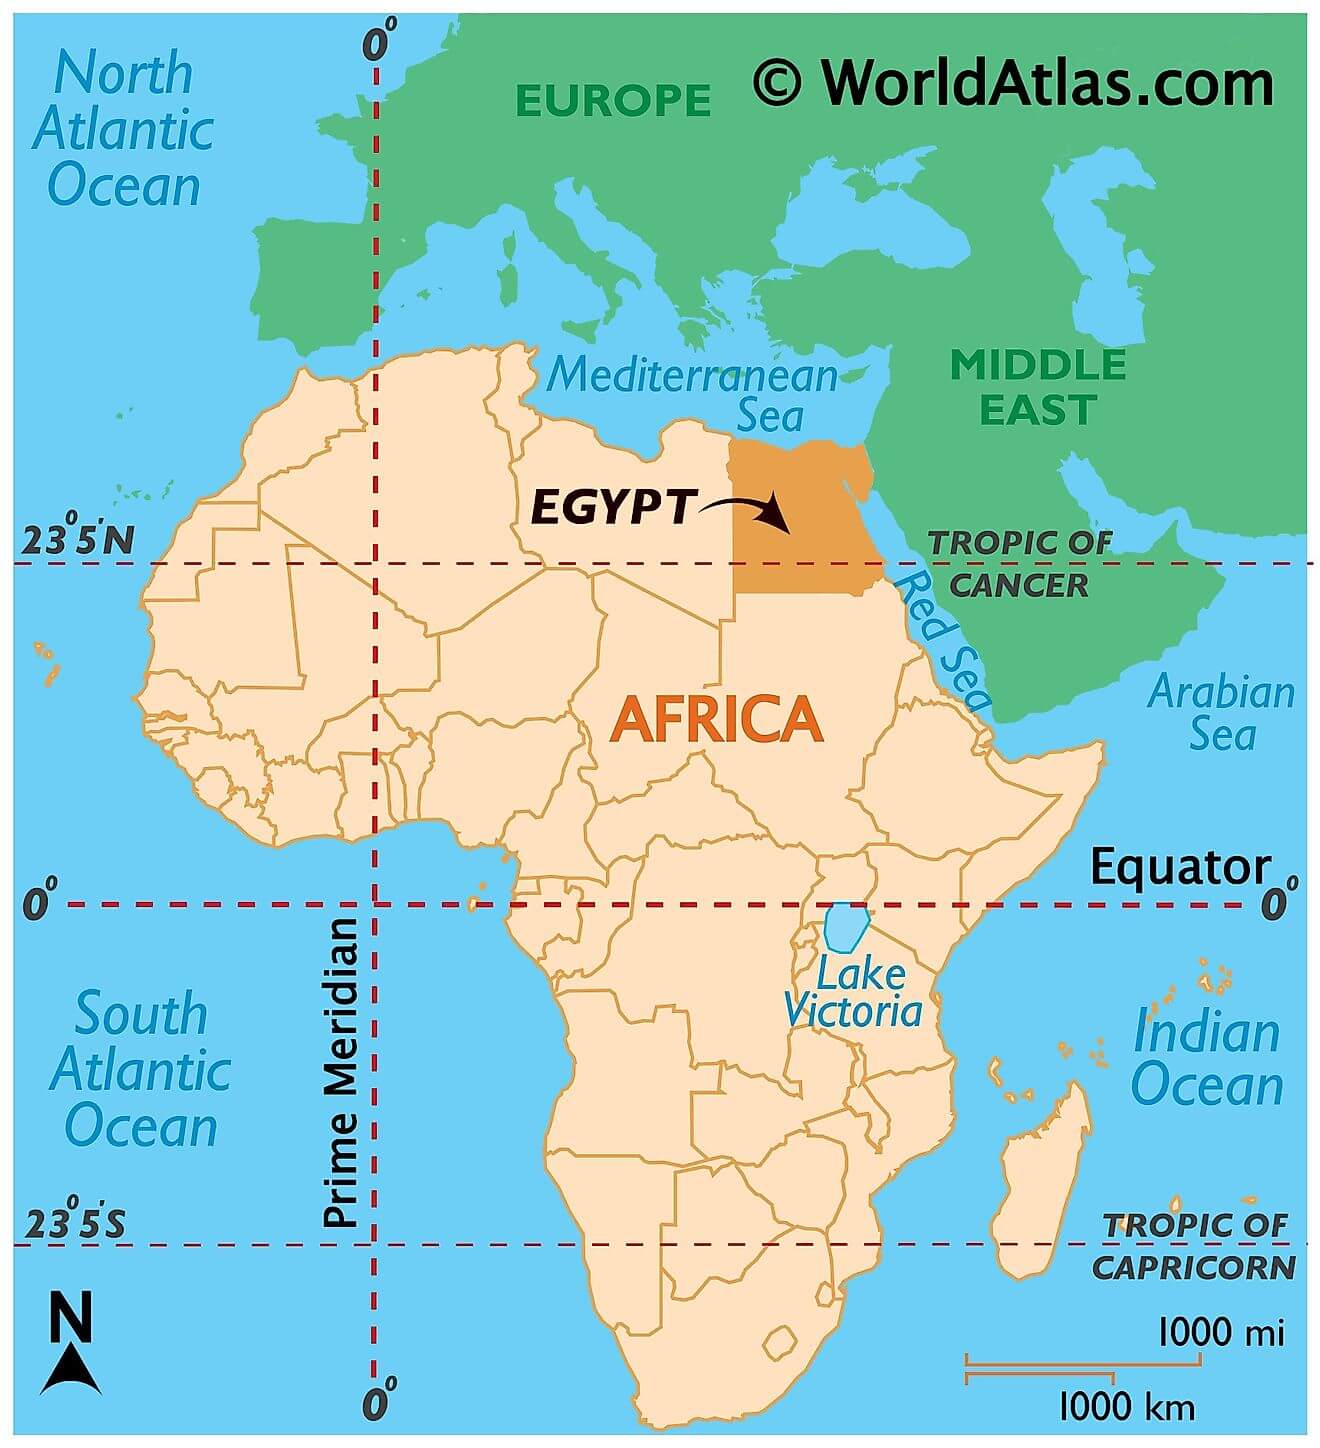 Where is Egypt?